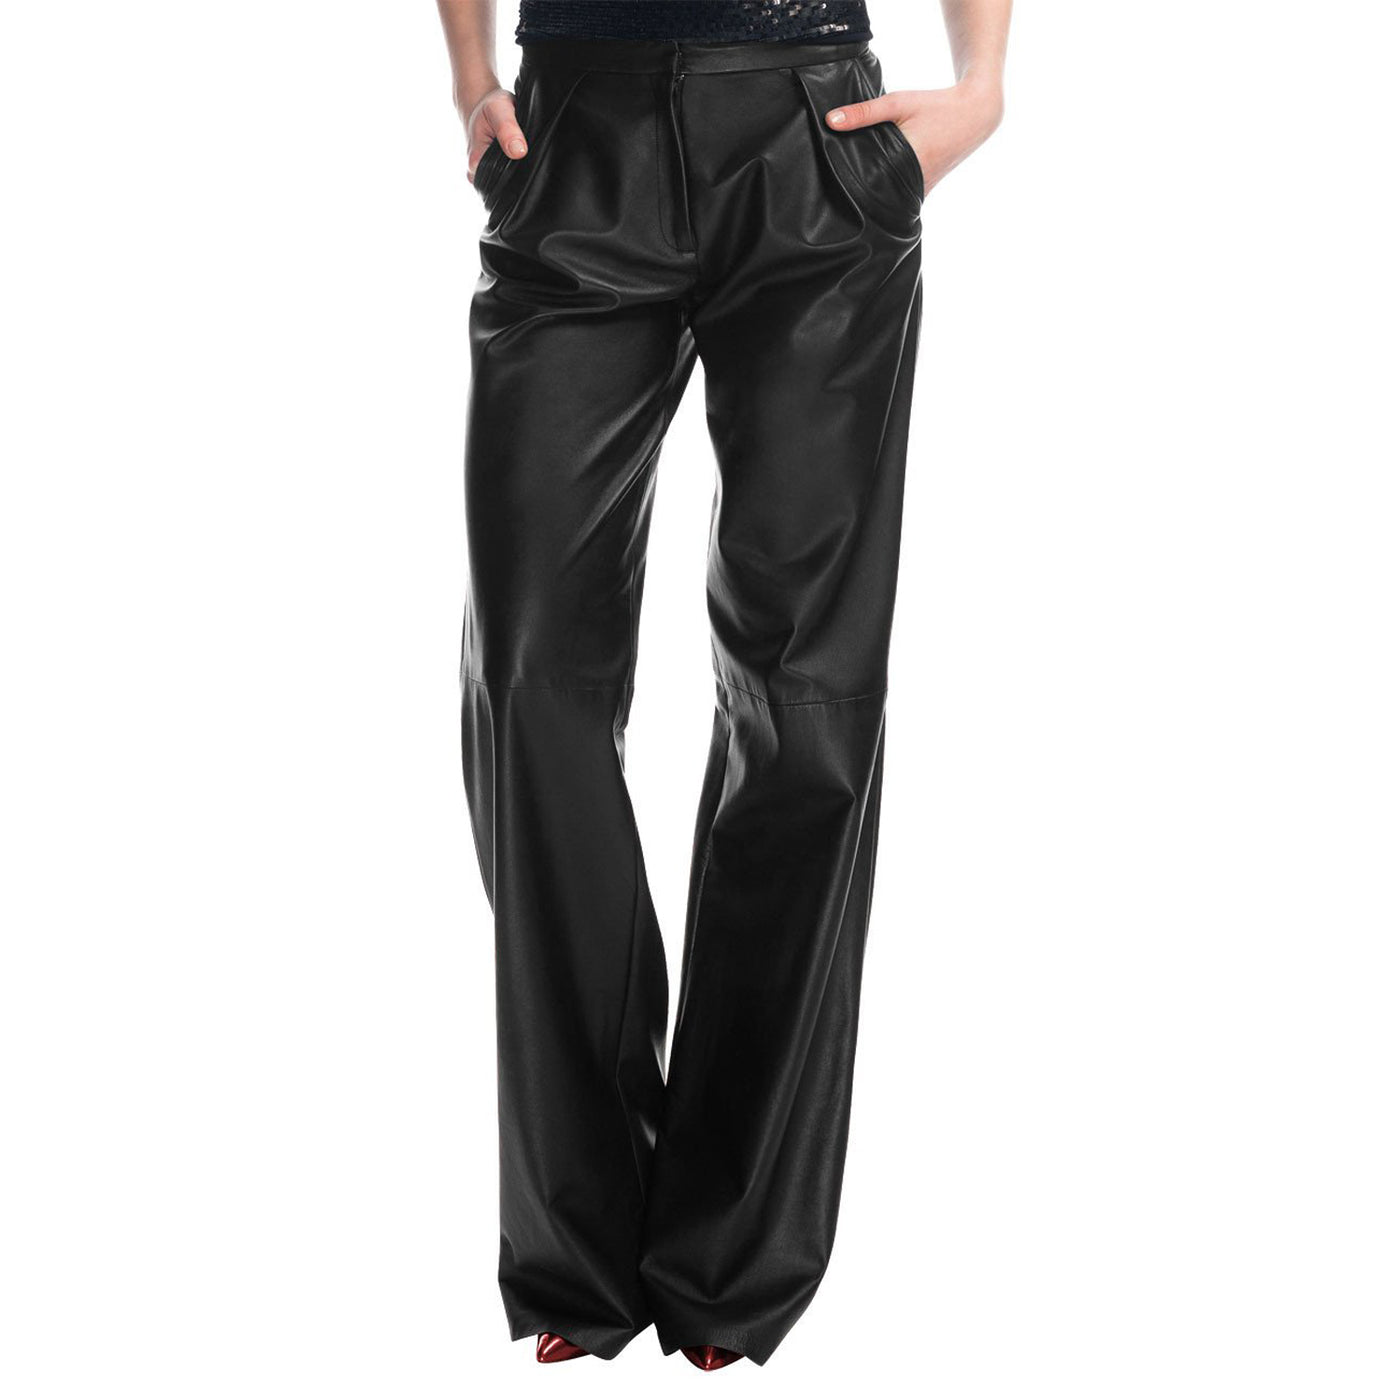 Unique or Custom Bell bottom leather pants